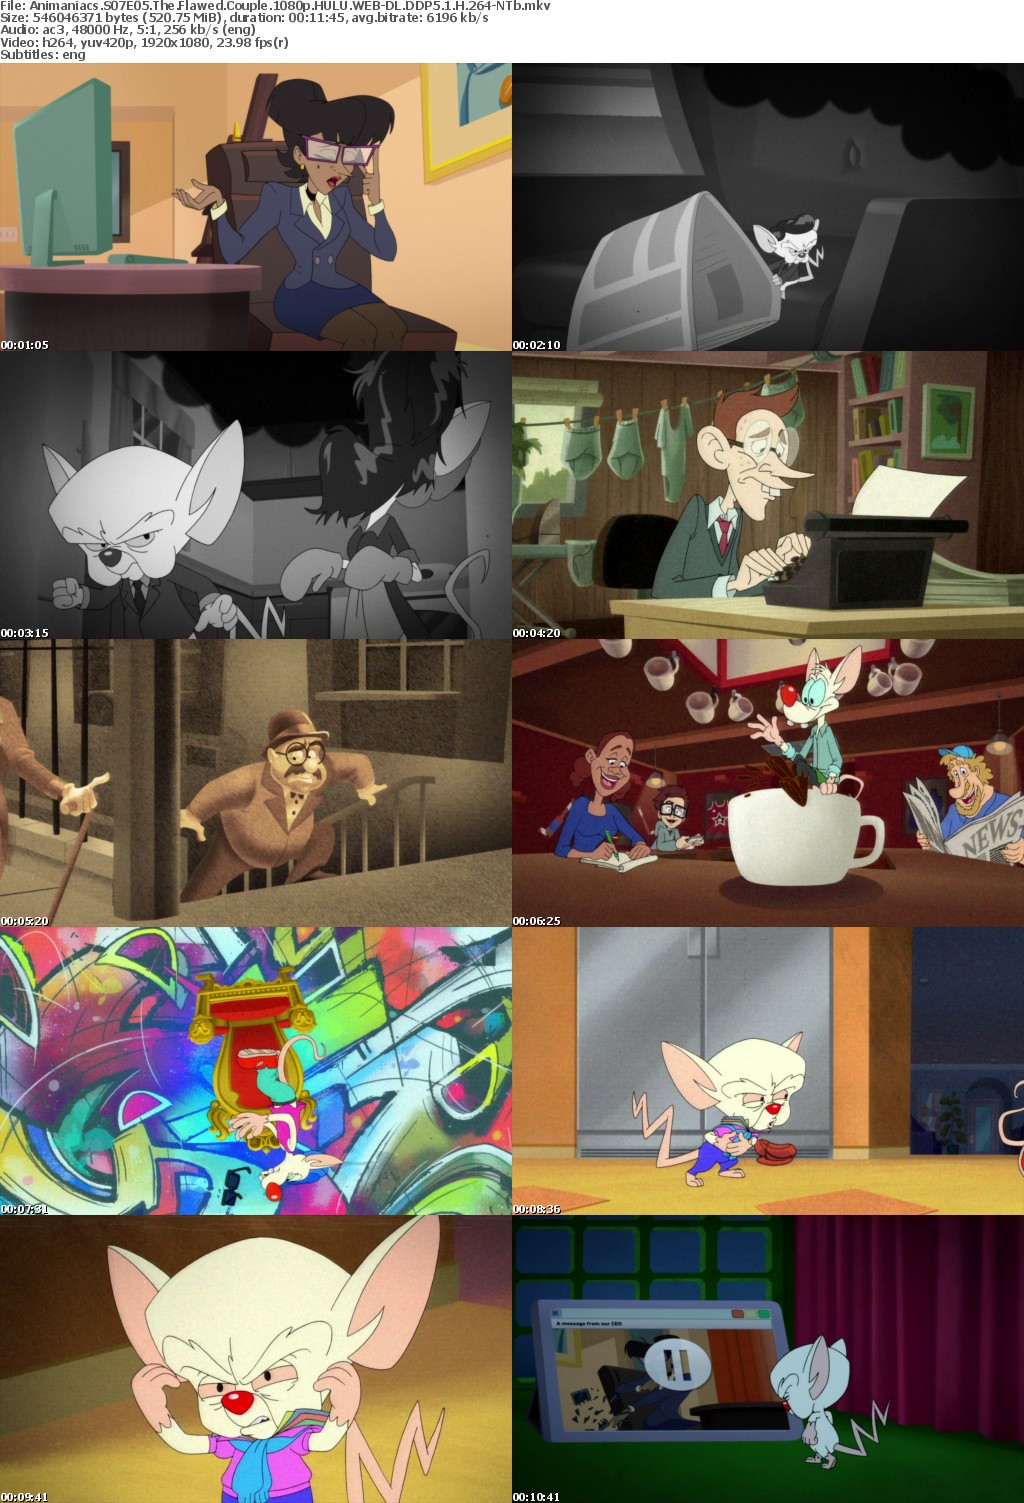 Animaniacs S07E05 The Flawed Couple 1080p HULU WEB-DL DDP5 1 H 264-NTb